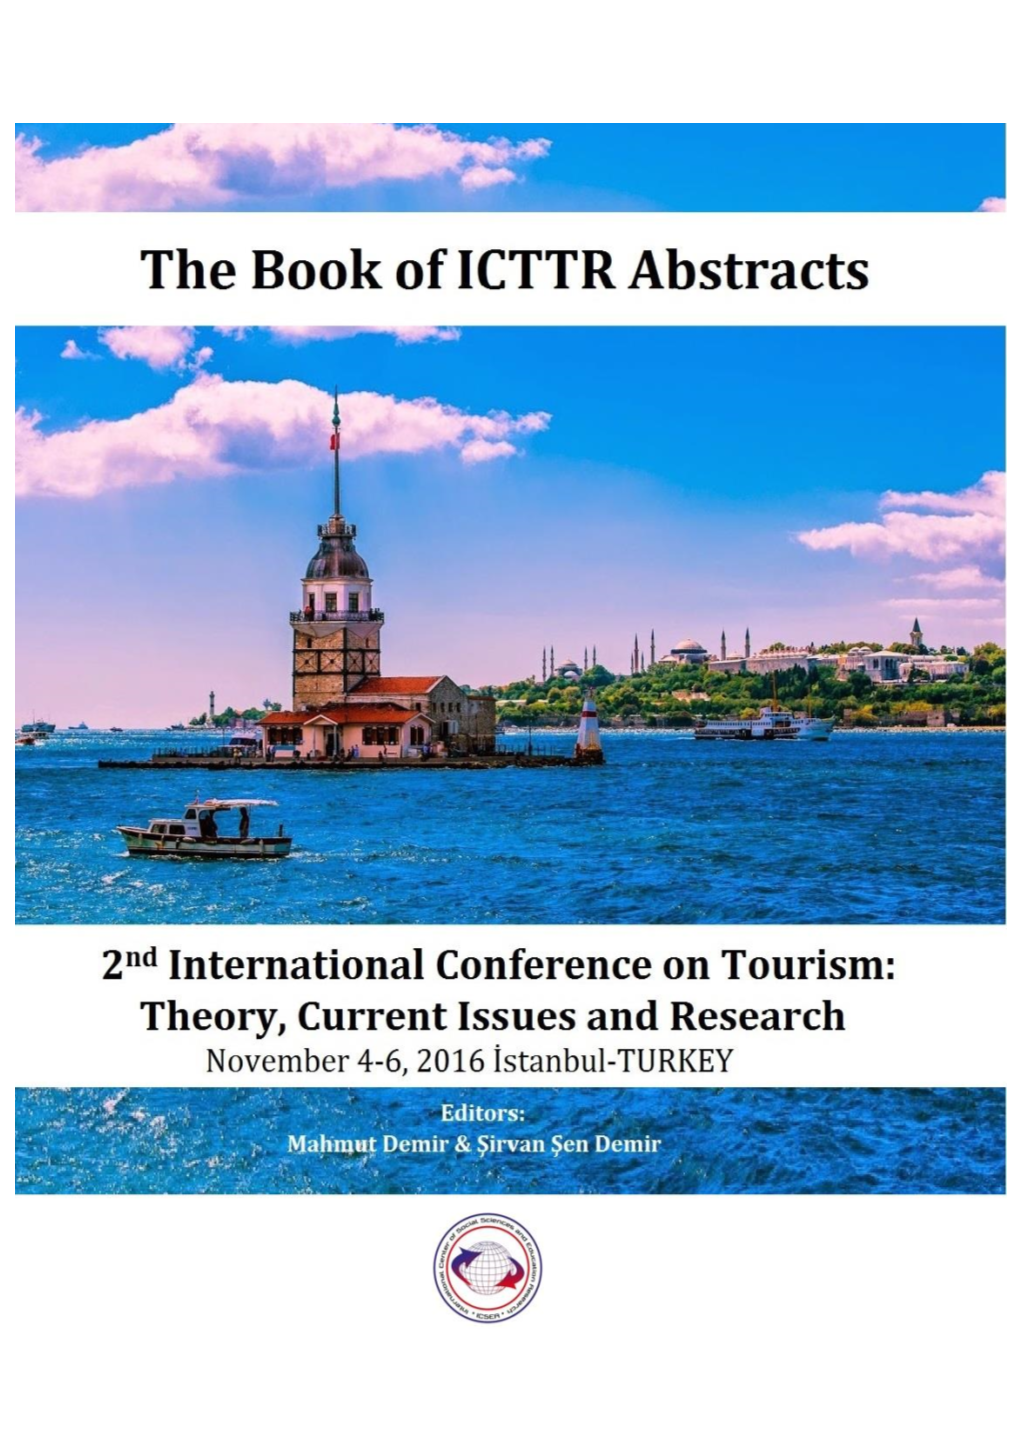 2Nd International Conference on Tourism: Theory, Current Issues and Research November 4-6, 2016 İstanbul-TURKEY